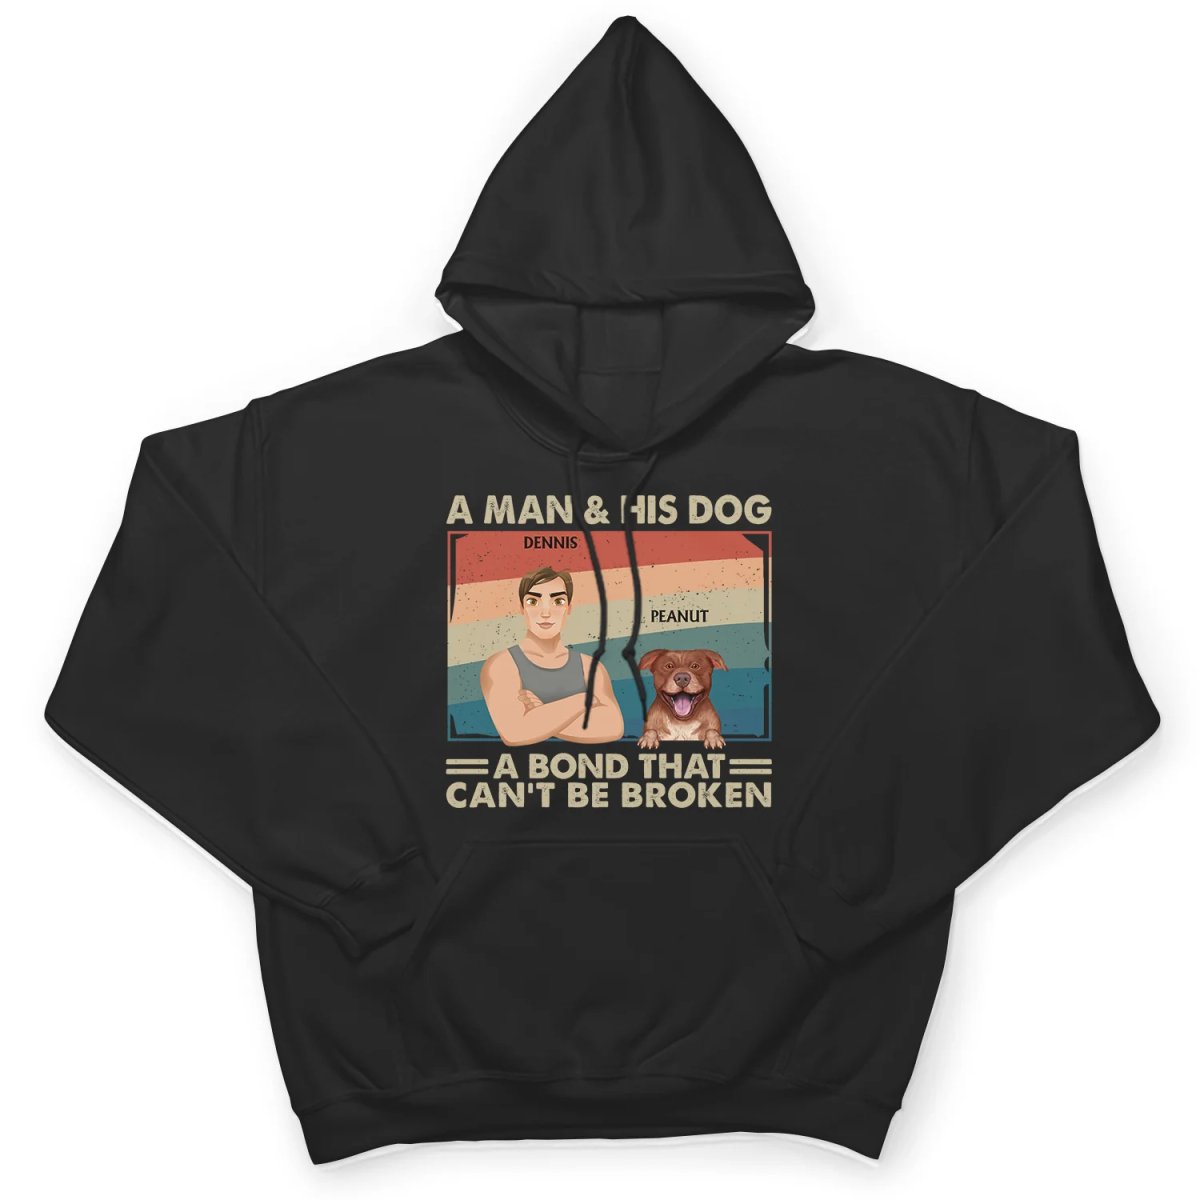 Dog Lovers - A Bond That Can't Be Broken - Personalized Unisex T - shirt, Hoodie, Sweatshirt - The Next Custom Gift